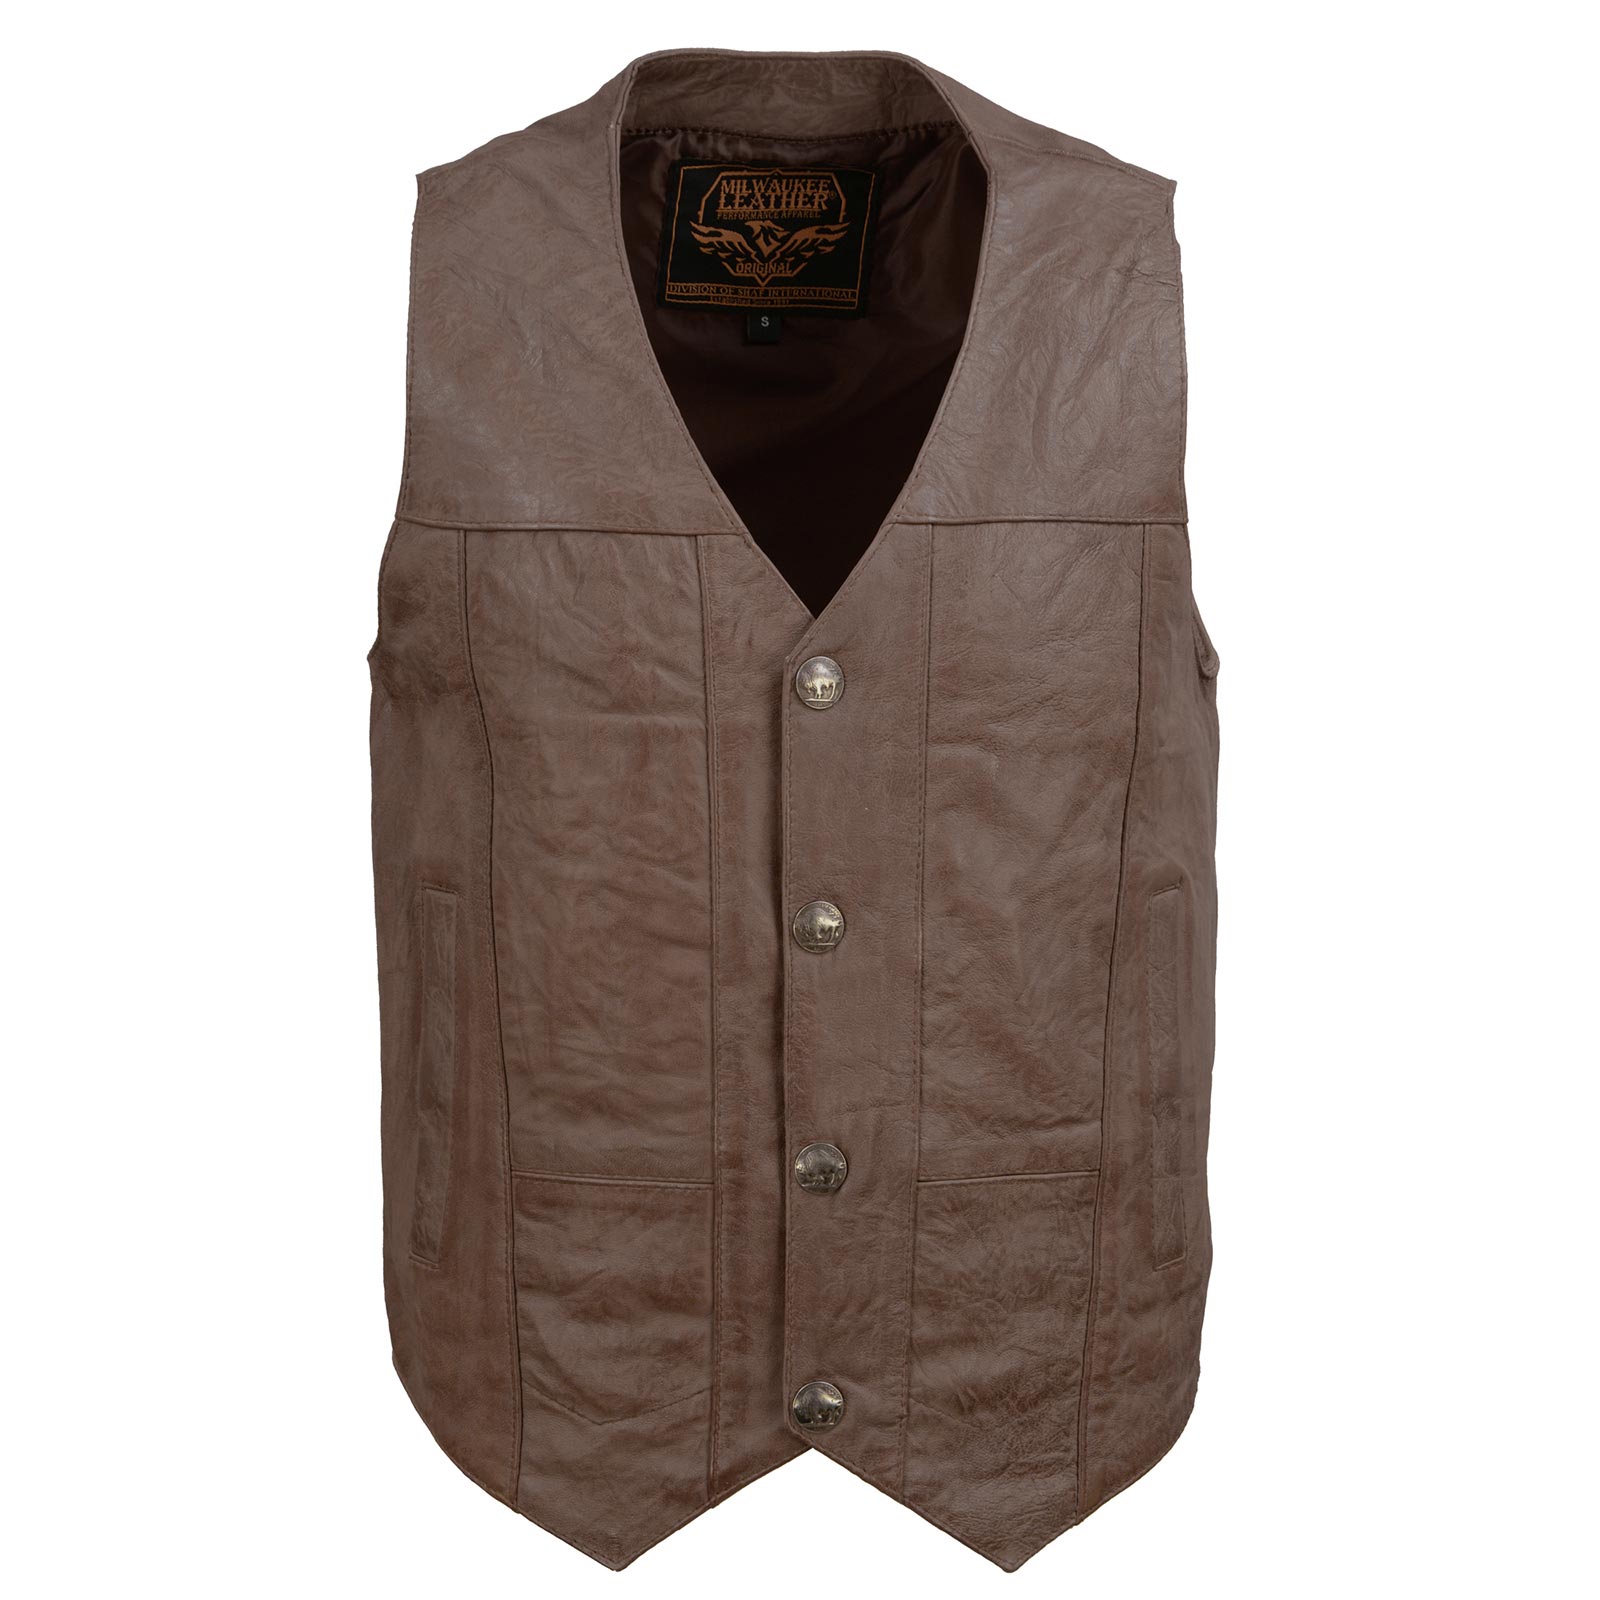 Milwaukee Leather LKM3702 Men's Leather V-Neck Western Style Motorcycle Rider Vest w/Classic Buffalo Snaps Closure